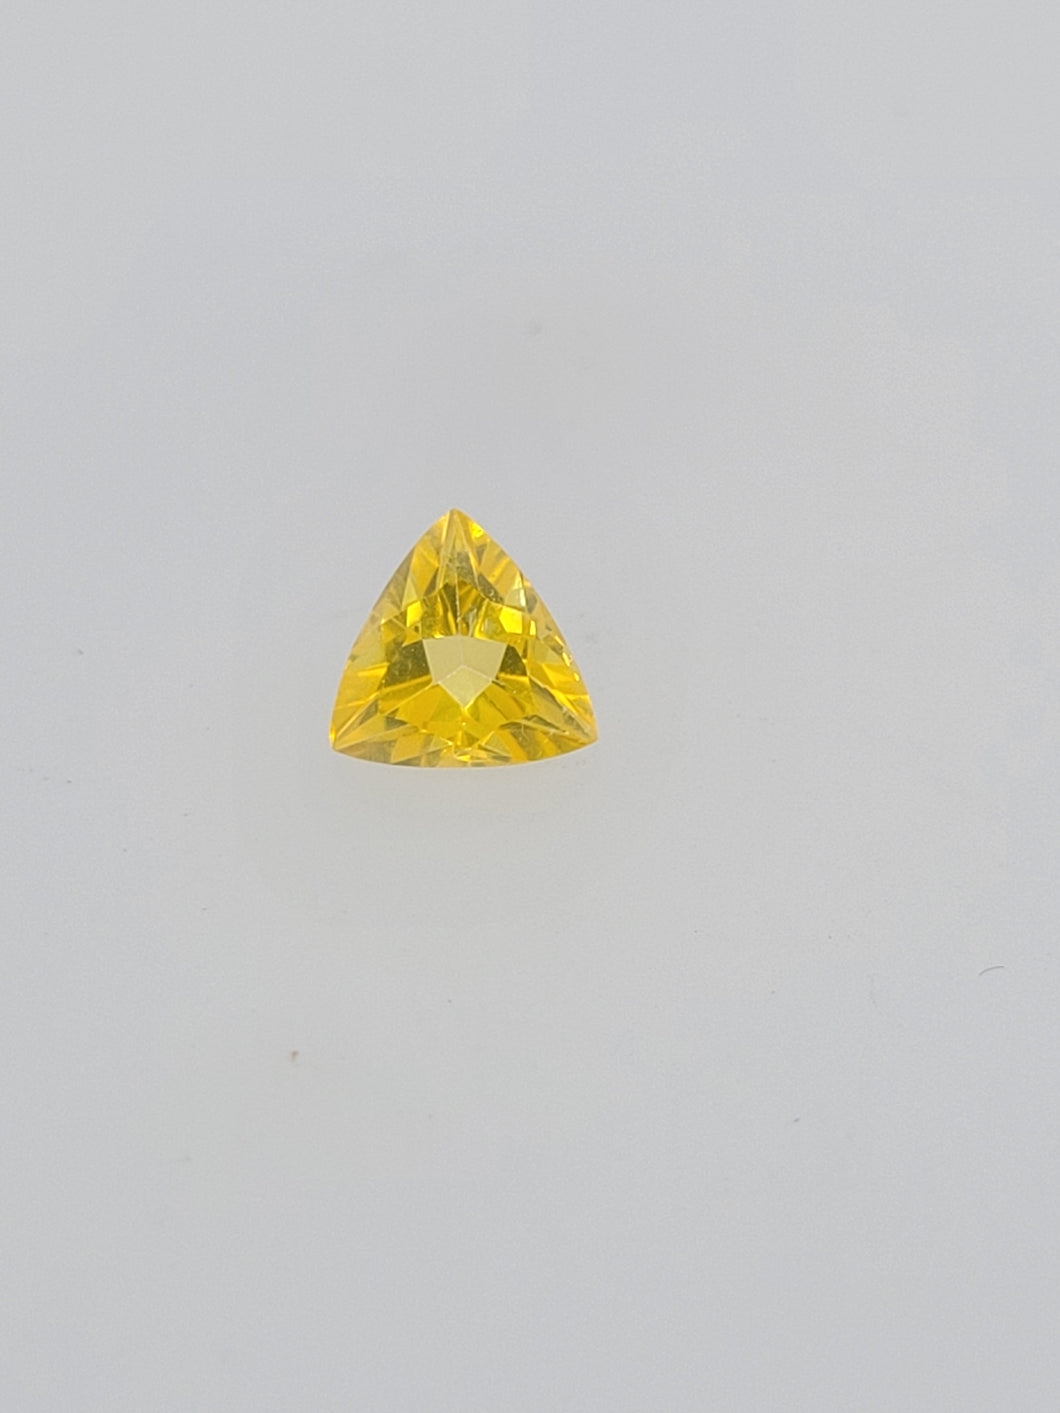 Loose Canary Yellow Topaz 1.75ct